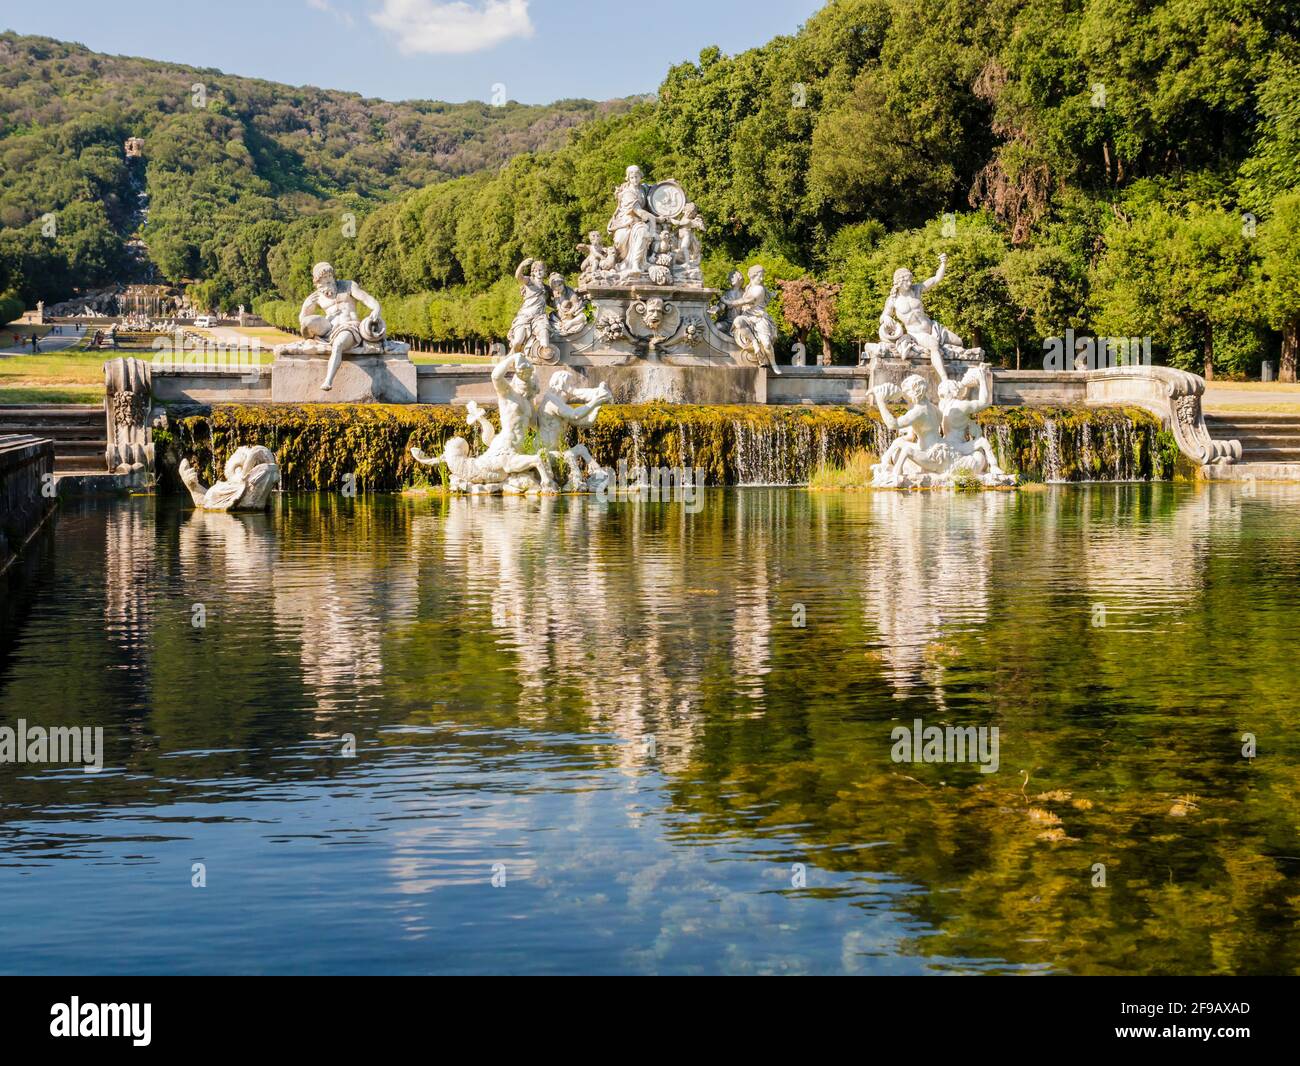 Stunning view of the fountain of Ceres, magnificent sculptural composition made using Carrara marble and travertine, Royal Palace of Caserta, Italy Stock Photo